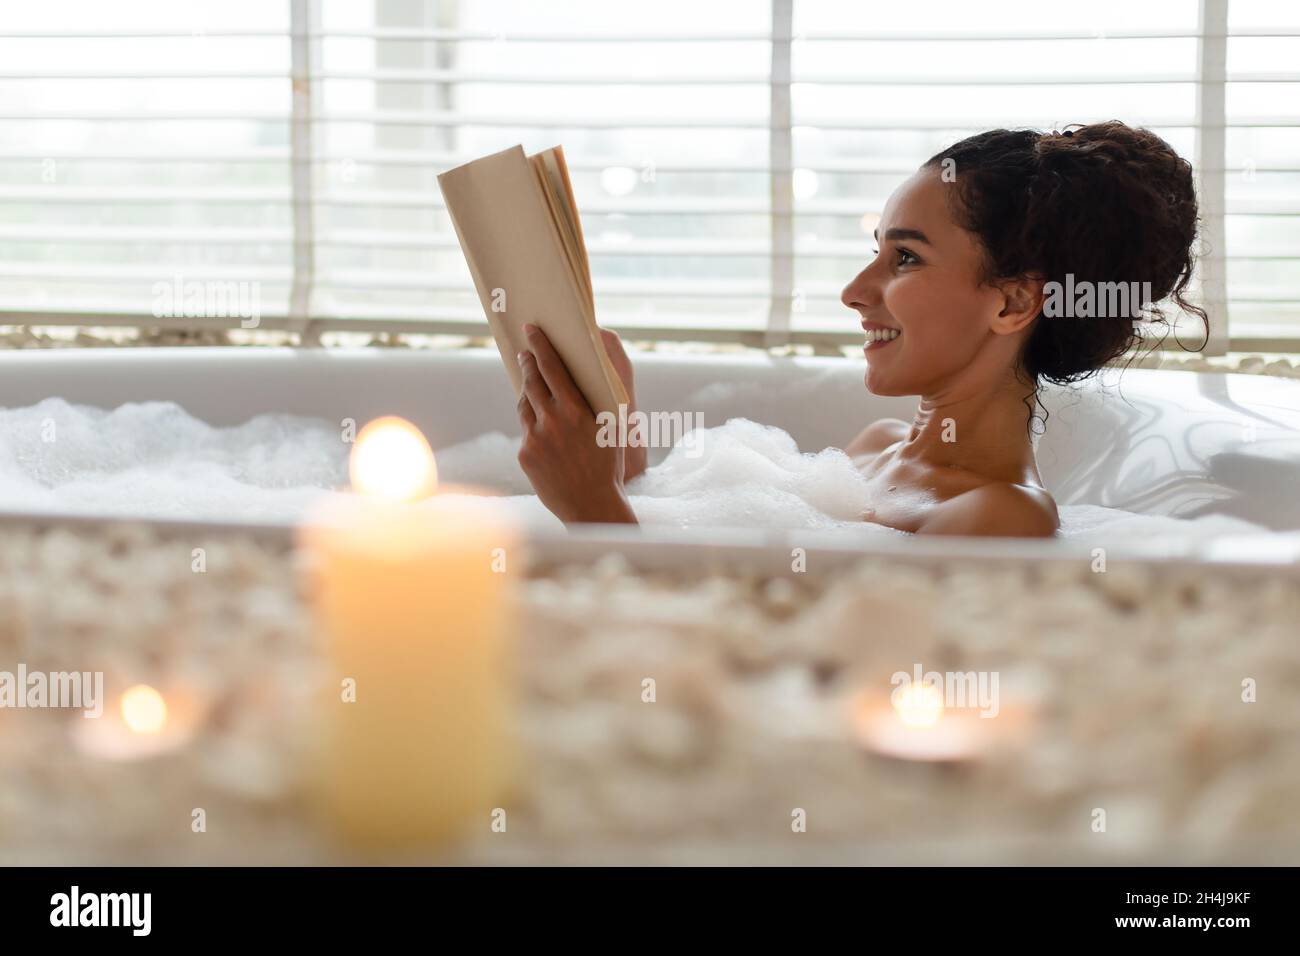 https://c8.alamy.com/comp/2H4J9KF/lovely-young-woman-lying-in-foamy-bath-reading-book-in-relaxing-atmosphere-with-candles-indoors-copy-space-2H4J9KF.jpg